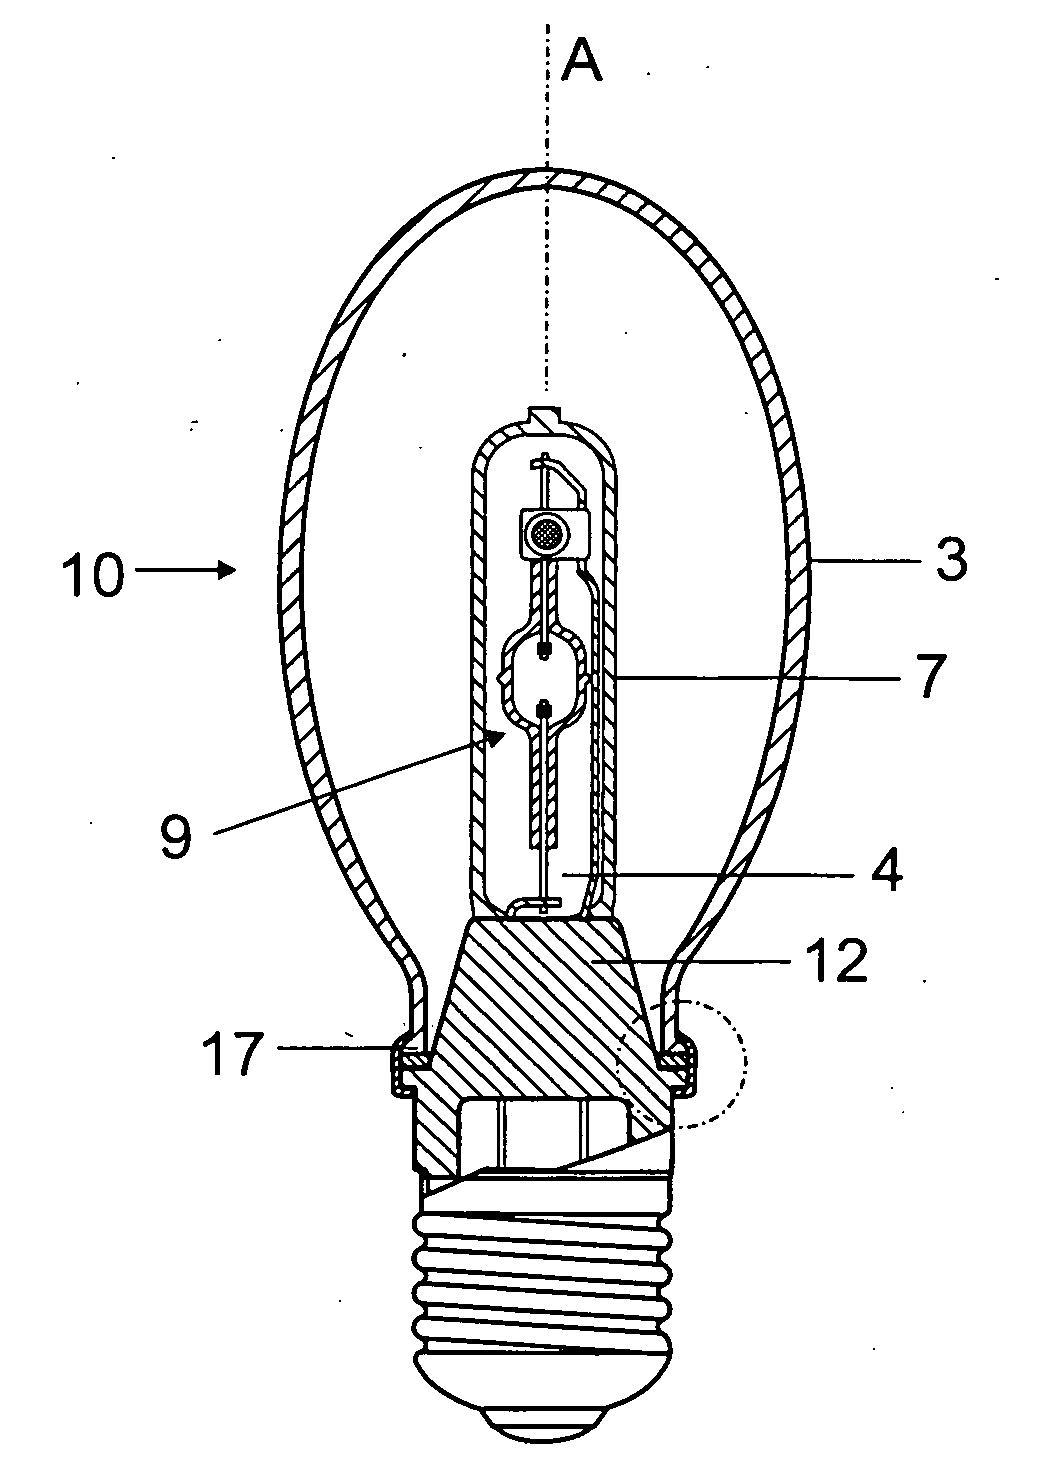 Lamp with a base at one end